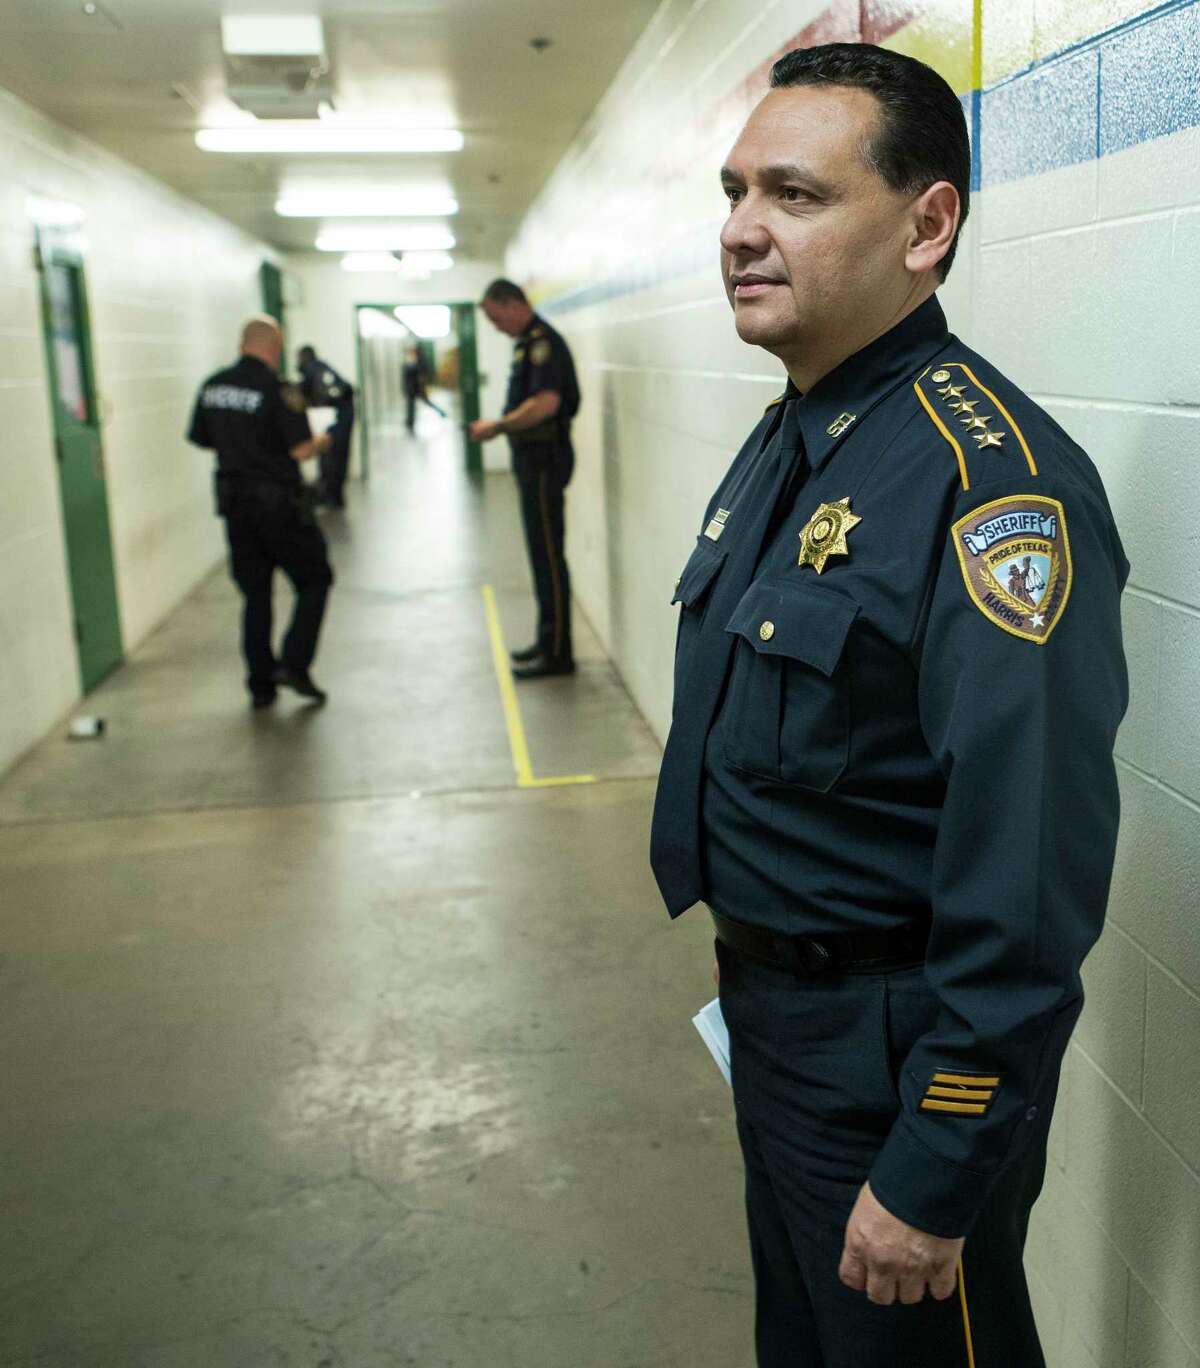 Sheriff Ed Gonzalez says jail overcrowding has forced him to deploy ICE-trained deputies elsewhere.